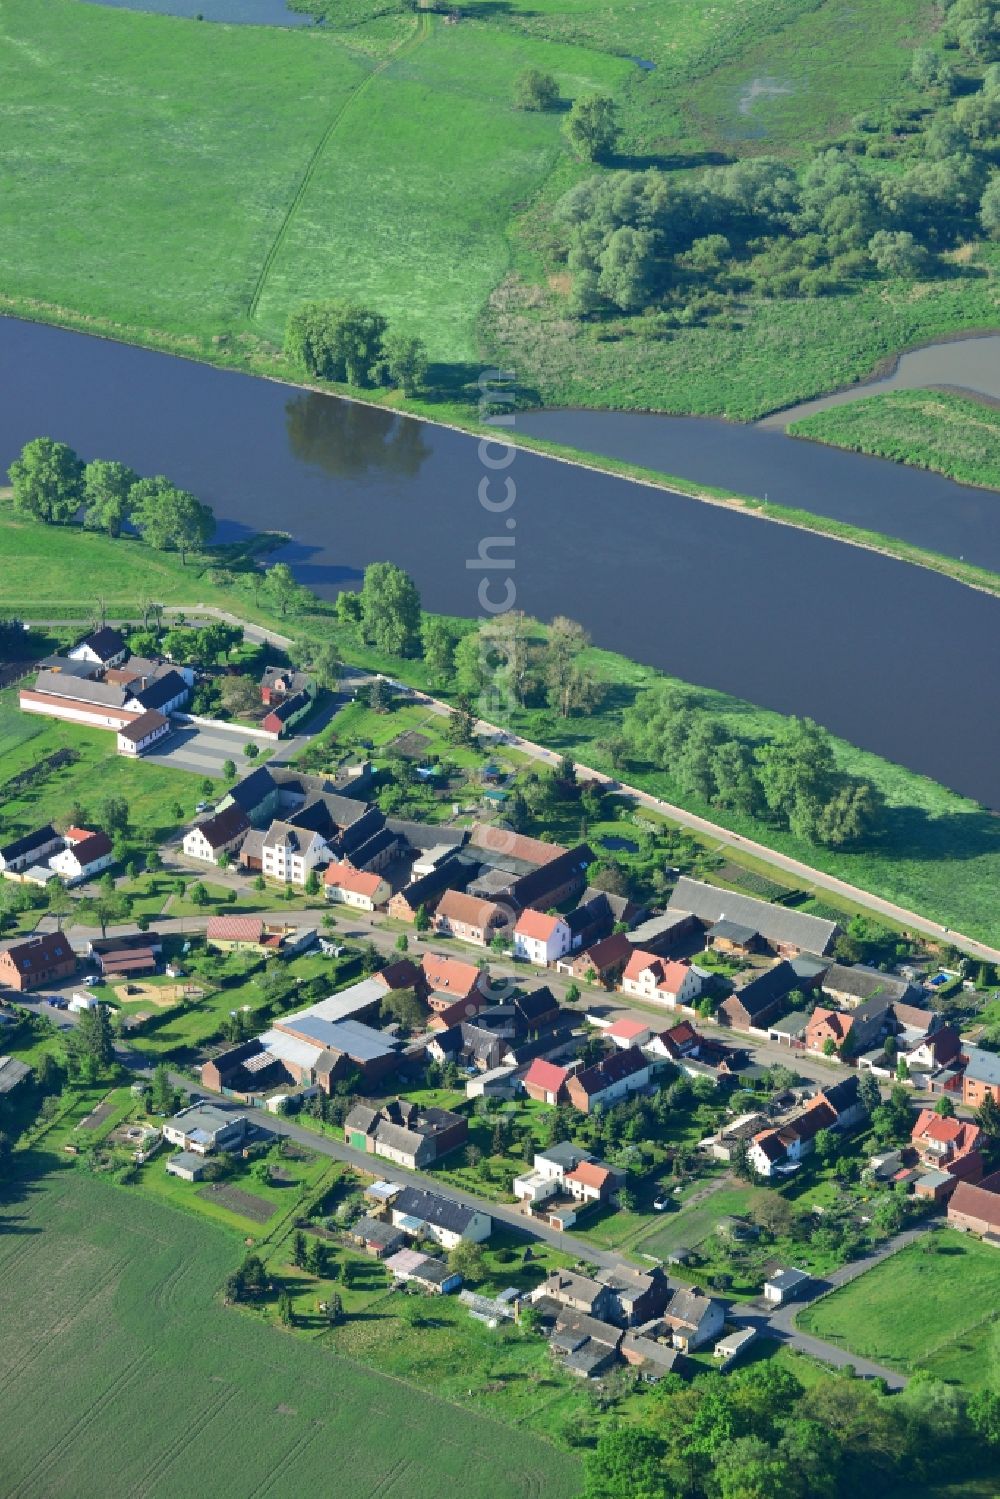 Aerial photograph Gallin, Zahna-Elster - Village core in Gallin, Zahna-Elster in the state Saxony-Anhalt